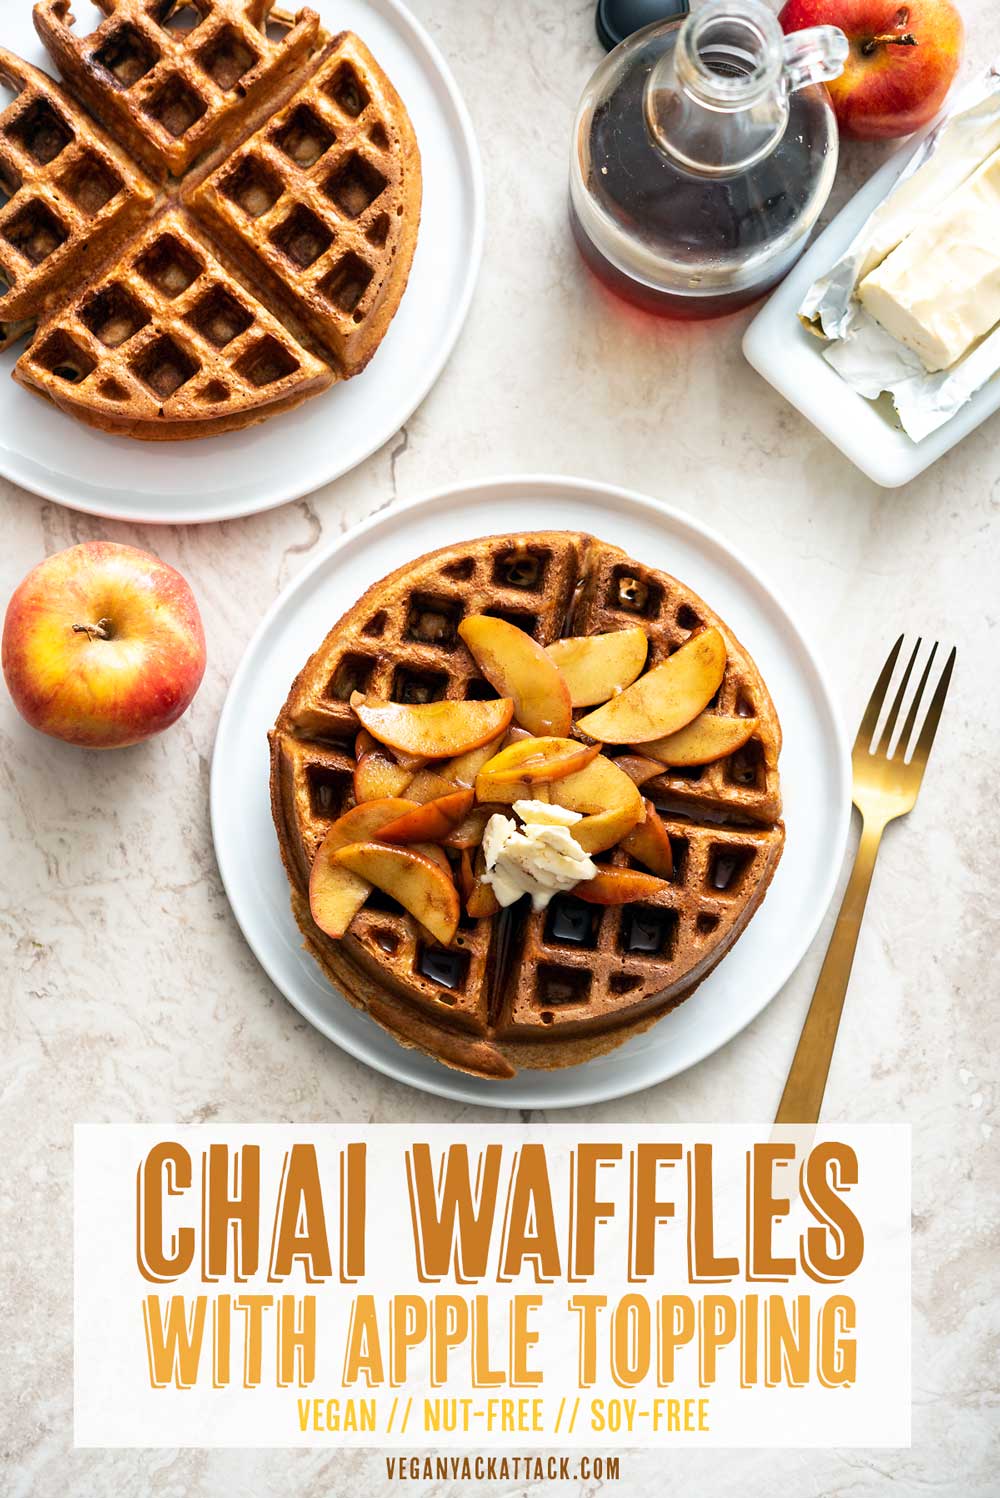 These spiced Chai Waffles with Cinnamon Apple Topping are the perfect fall brunch meal! Plus, they're vegan and soy-free. #vegan #breakfast #nutfree #veganyackattack